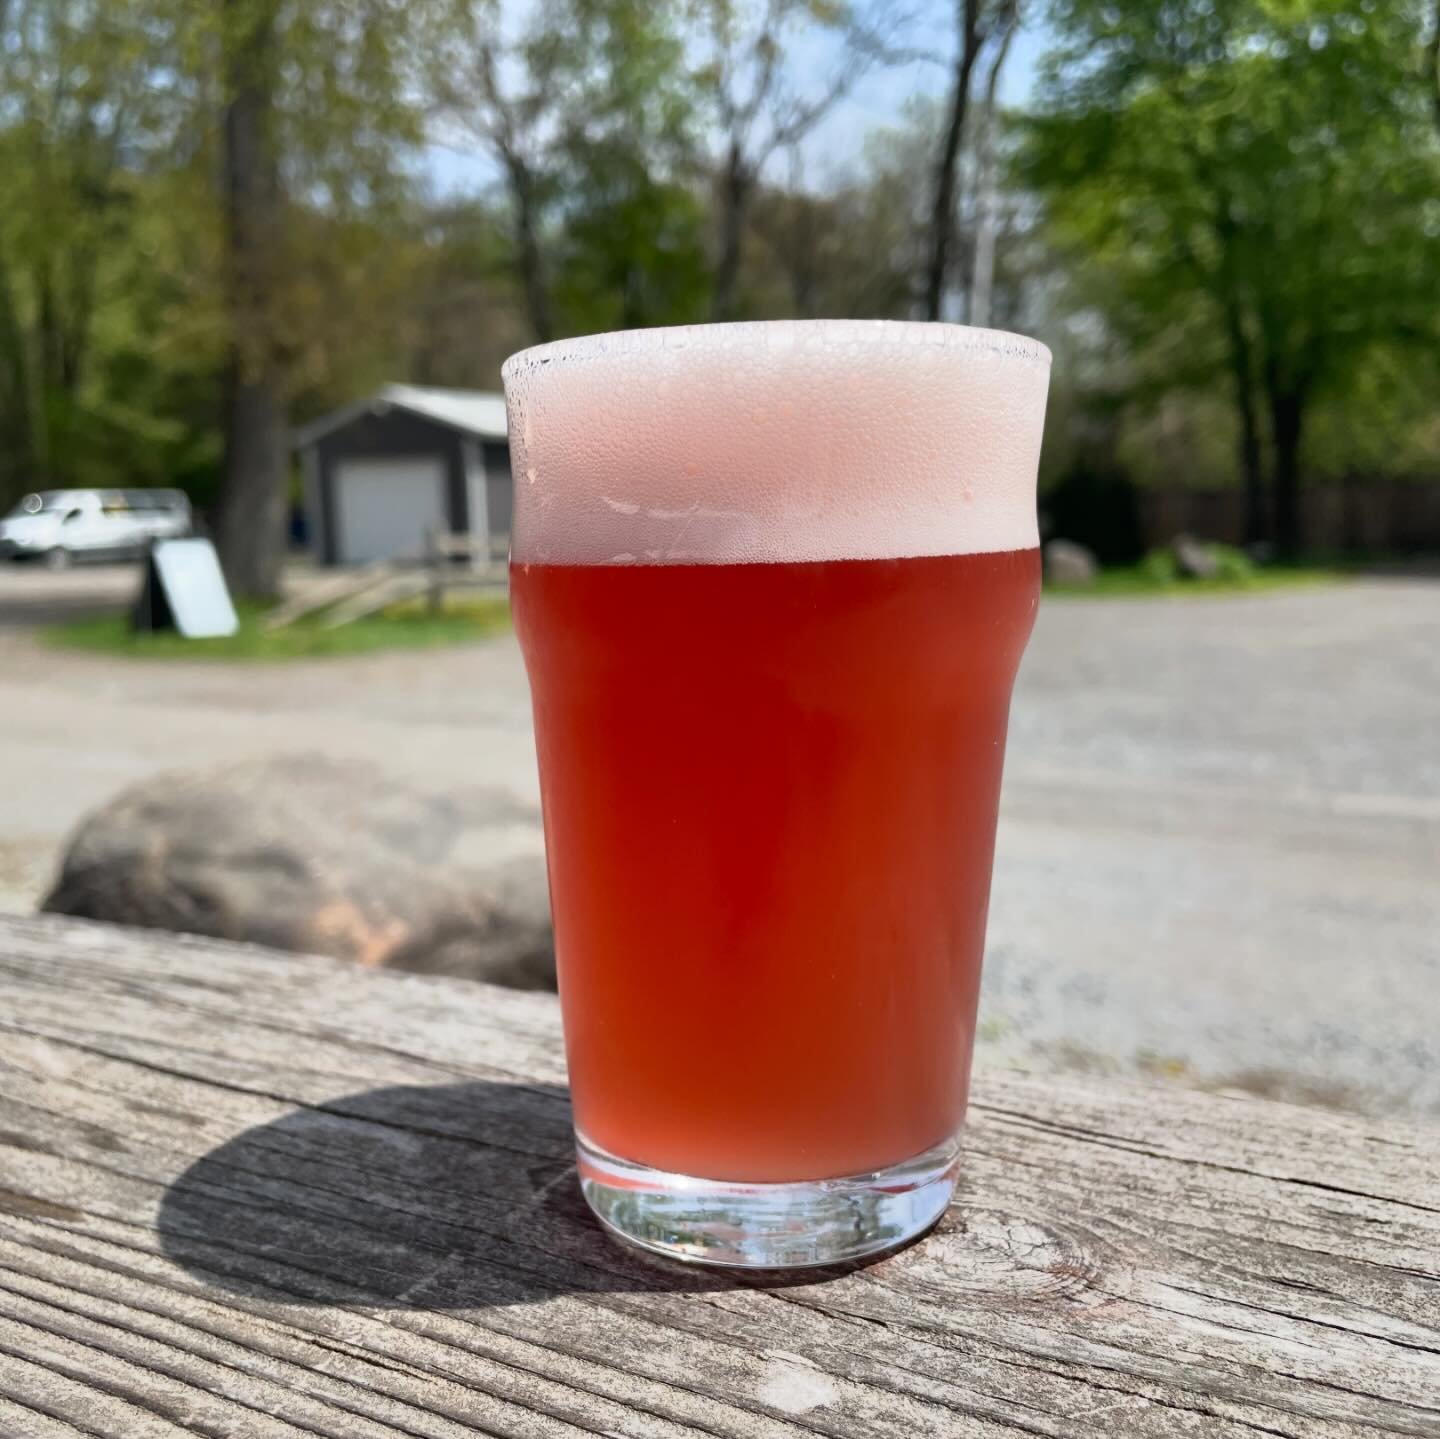 🚨New Beer🚨 Introducing Back Beet Saision. We packed this beer with smoked beets, ginger, and lemon for a refeshing blend of earthy and citrus flavors. Brewed in collaborarion with @sevenpointsbrewery, @backstagepub501, and @unbeetable_518. Live tun